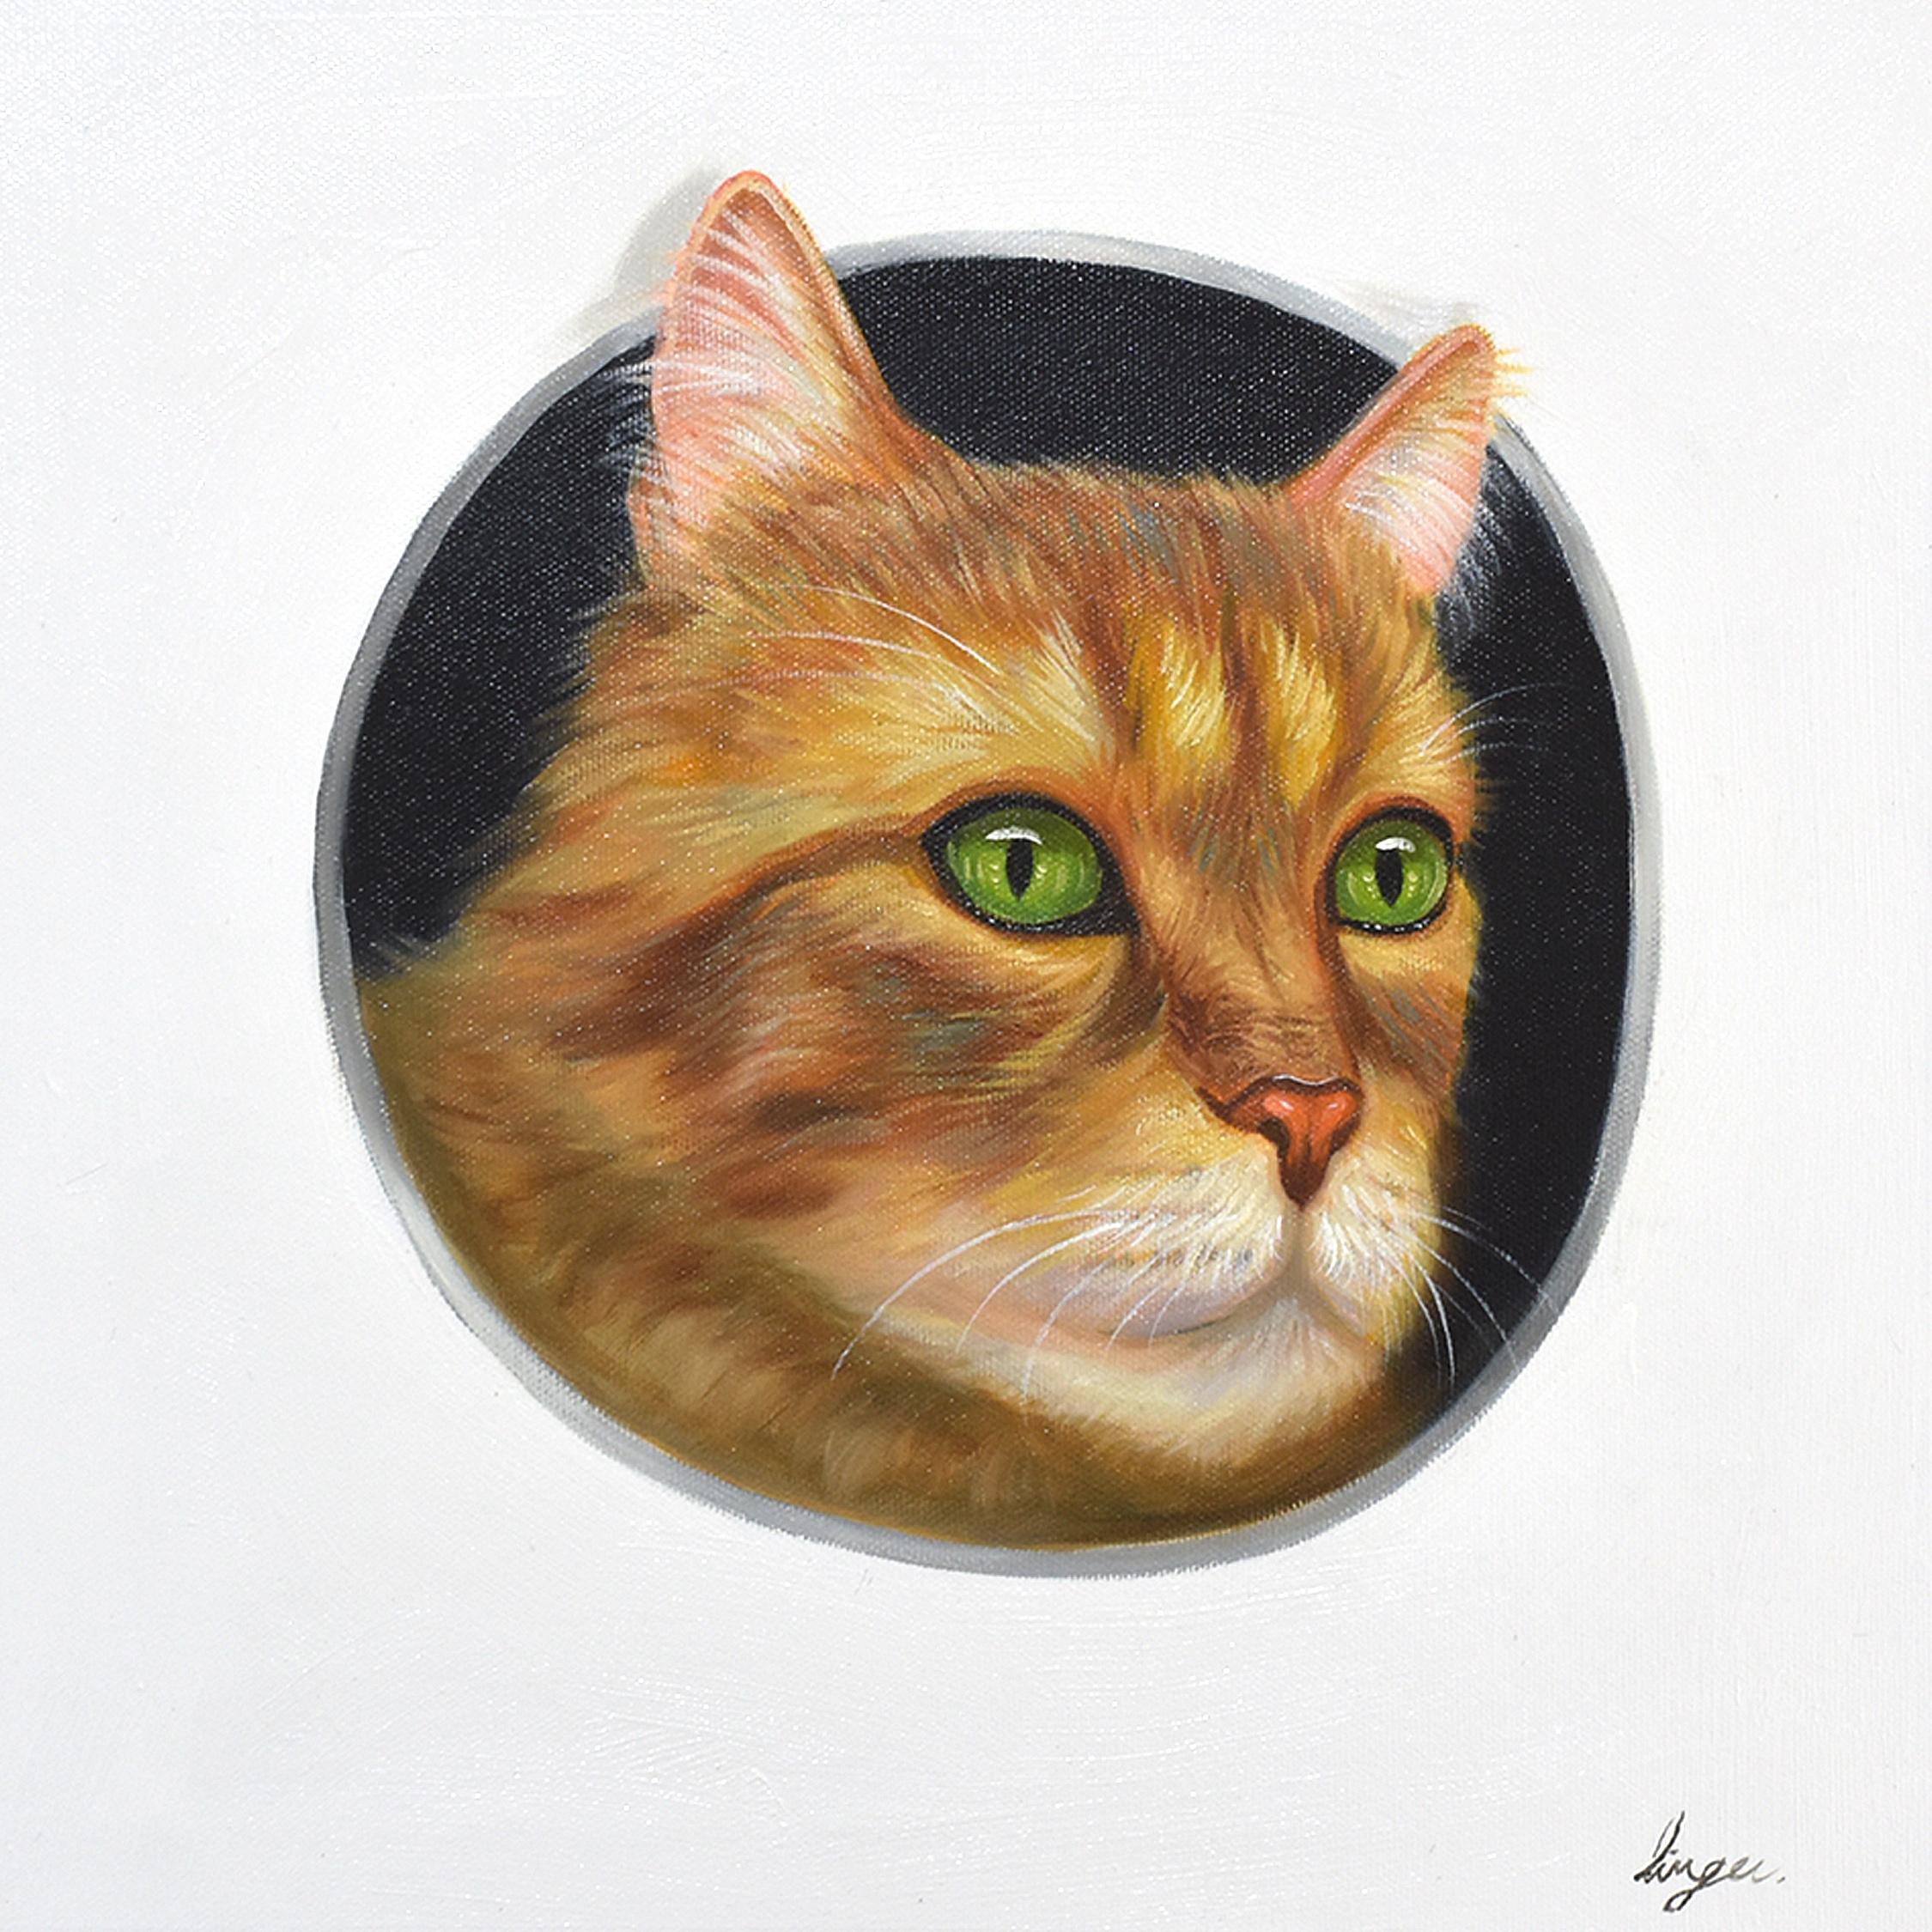 Lingee Bangkhuntod Animal Painting - Peeking Cats 5. Cat looking Through a Hole. Adorable Orange Cat in Hole